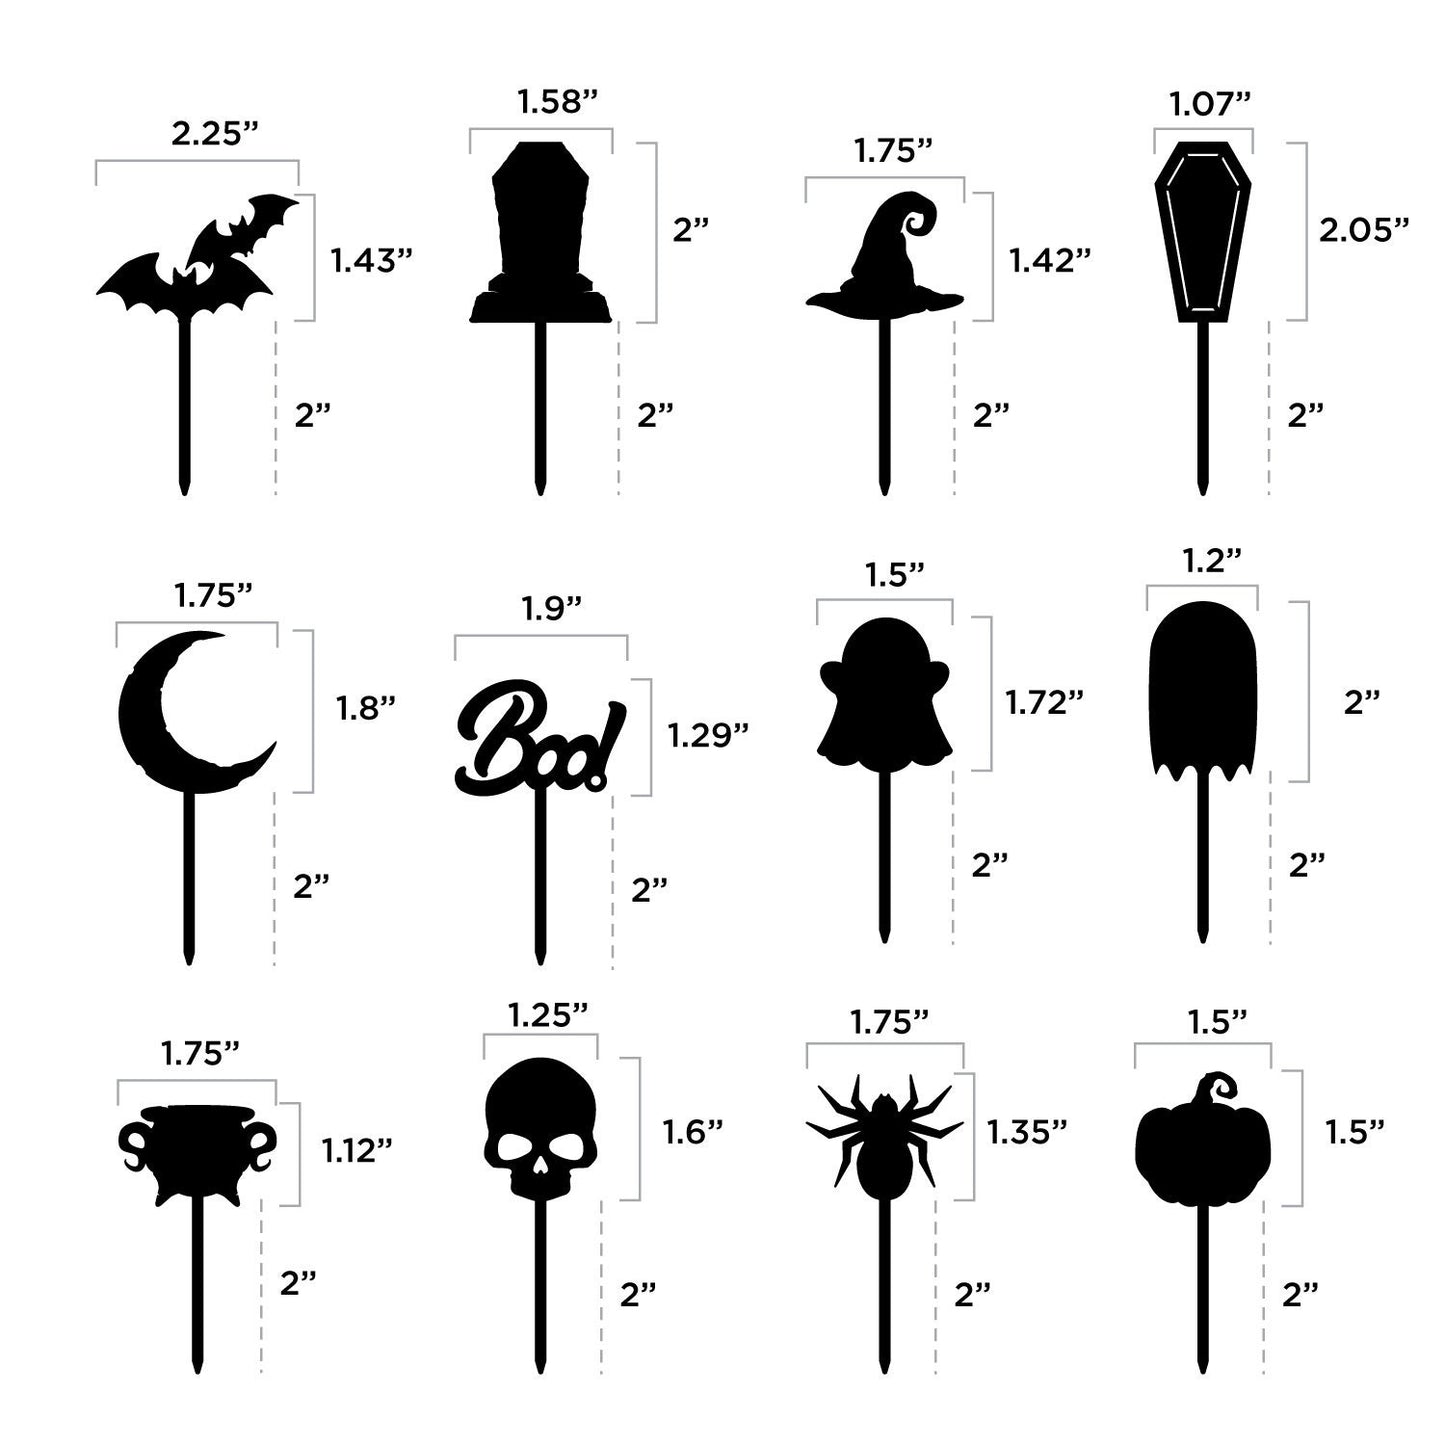 Cupcake Toppers Spooky Halloween Wedding Topper Goth Holiday Party Decorations Event Decorations Silhoutte Blanks DIY Acrylic Topper Cake